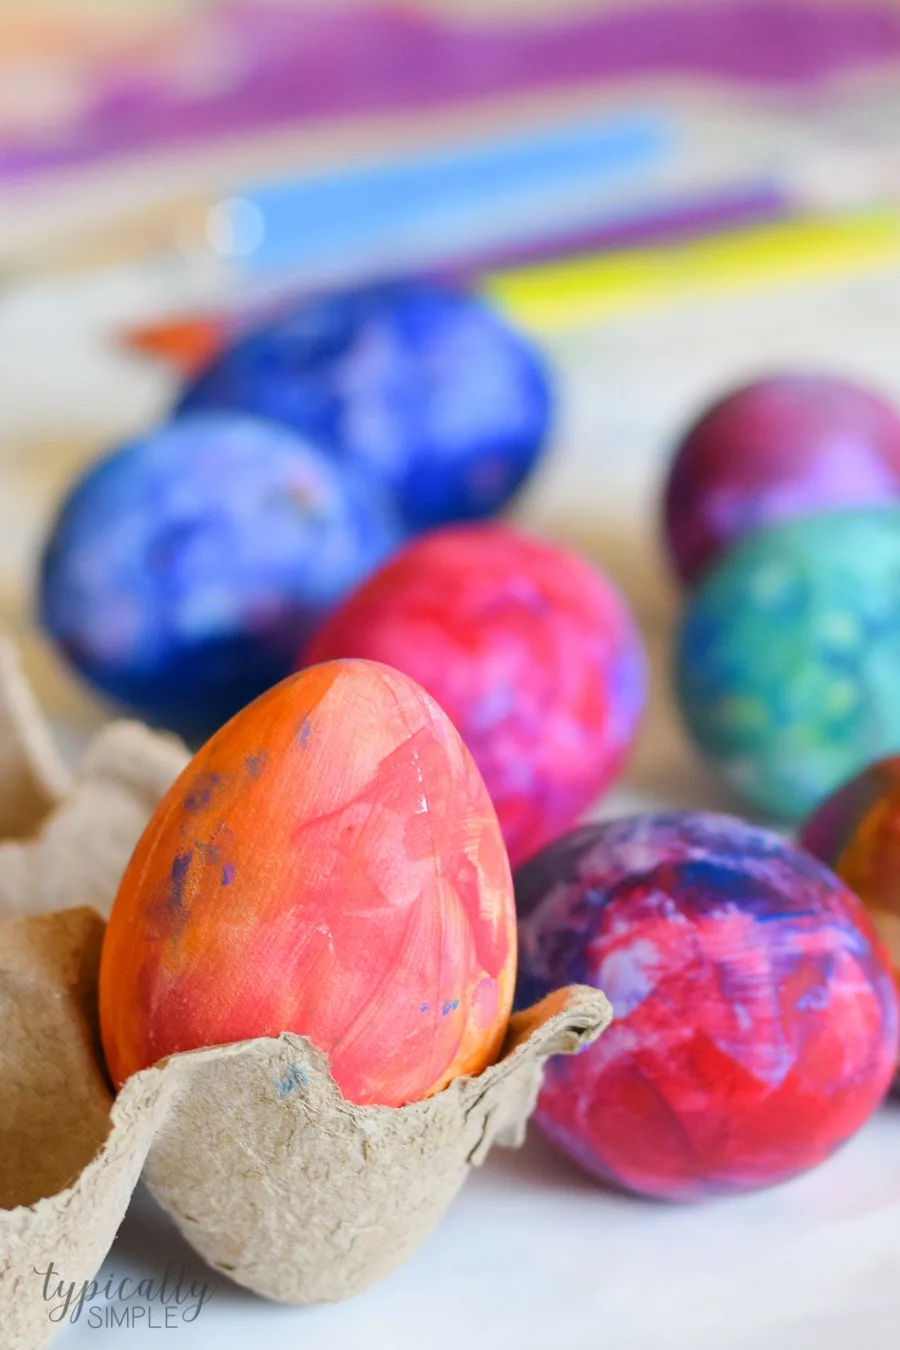 A fun alternative to using dye, grab some paint supplies to make these bright and colorful Easter eggs with the kids!